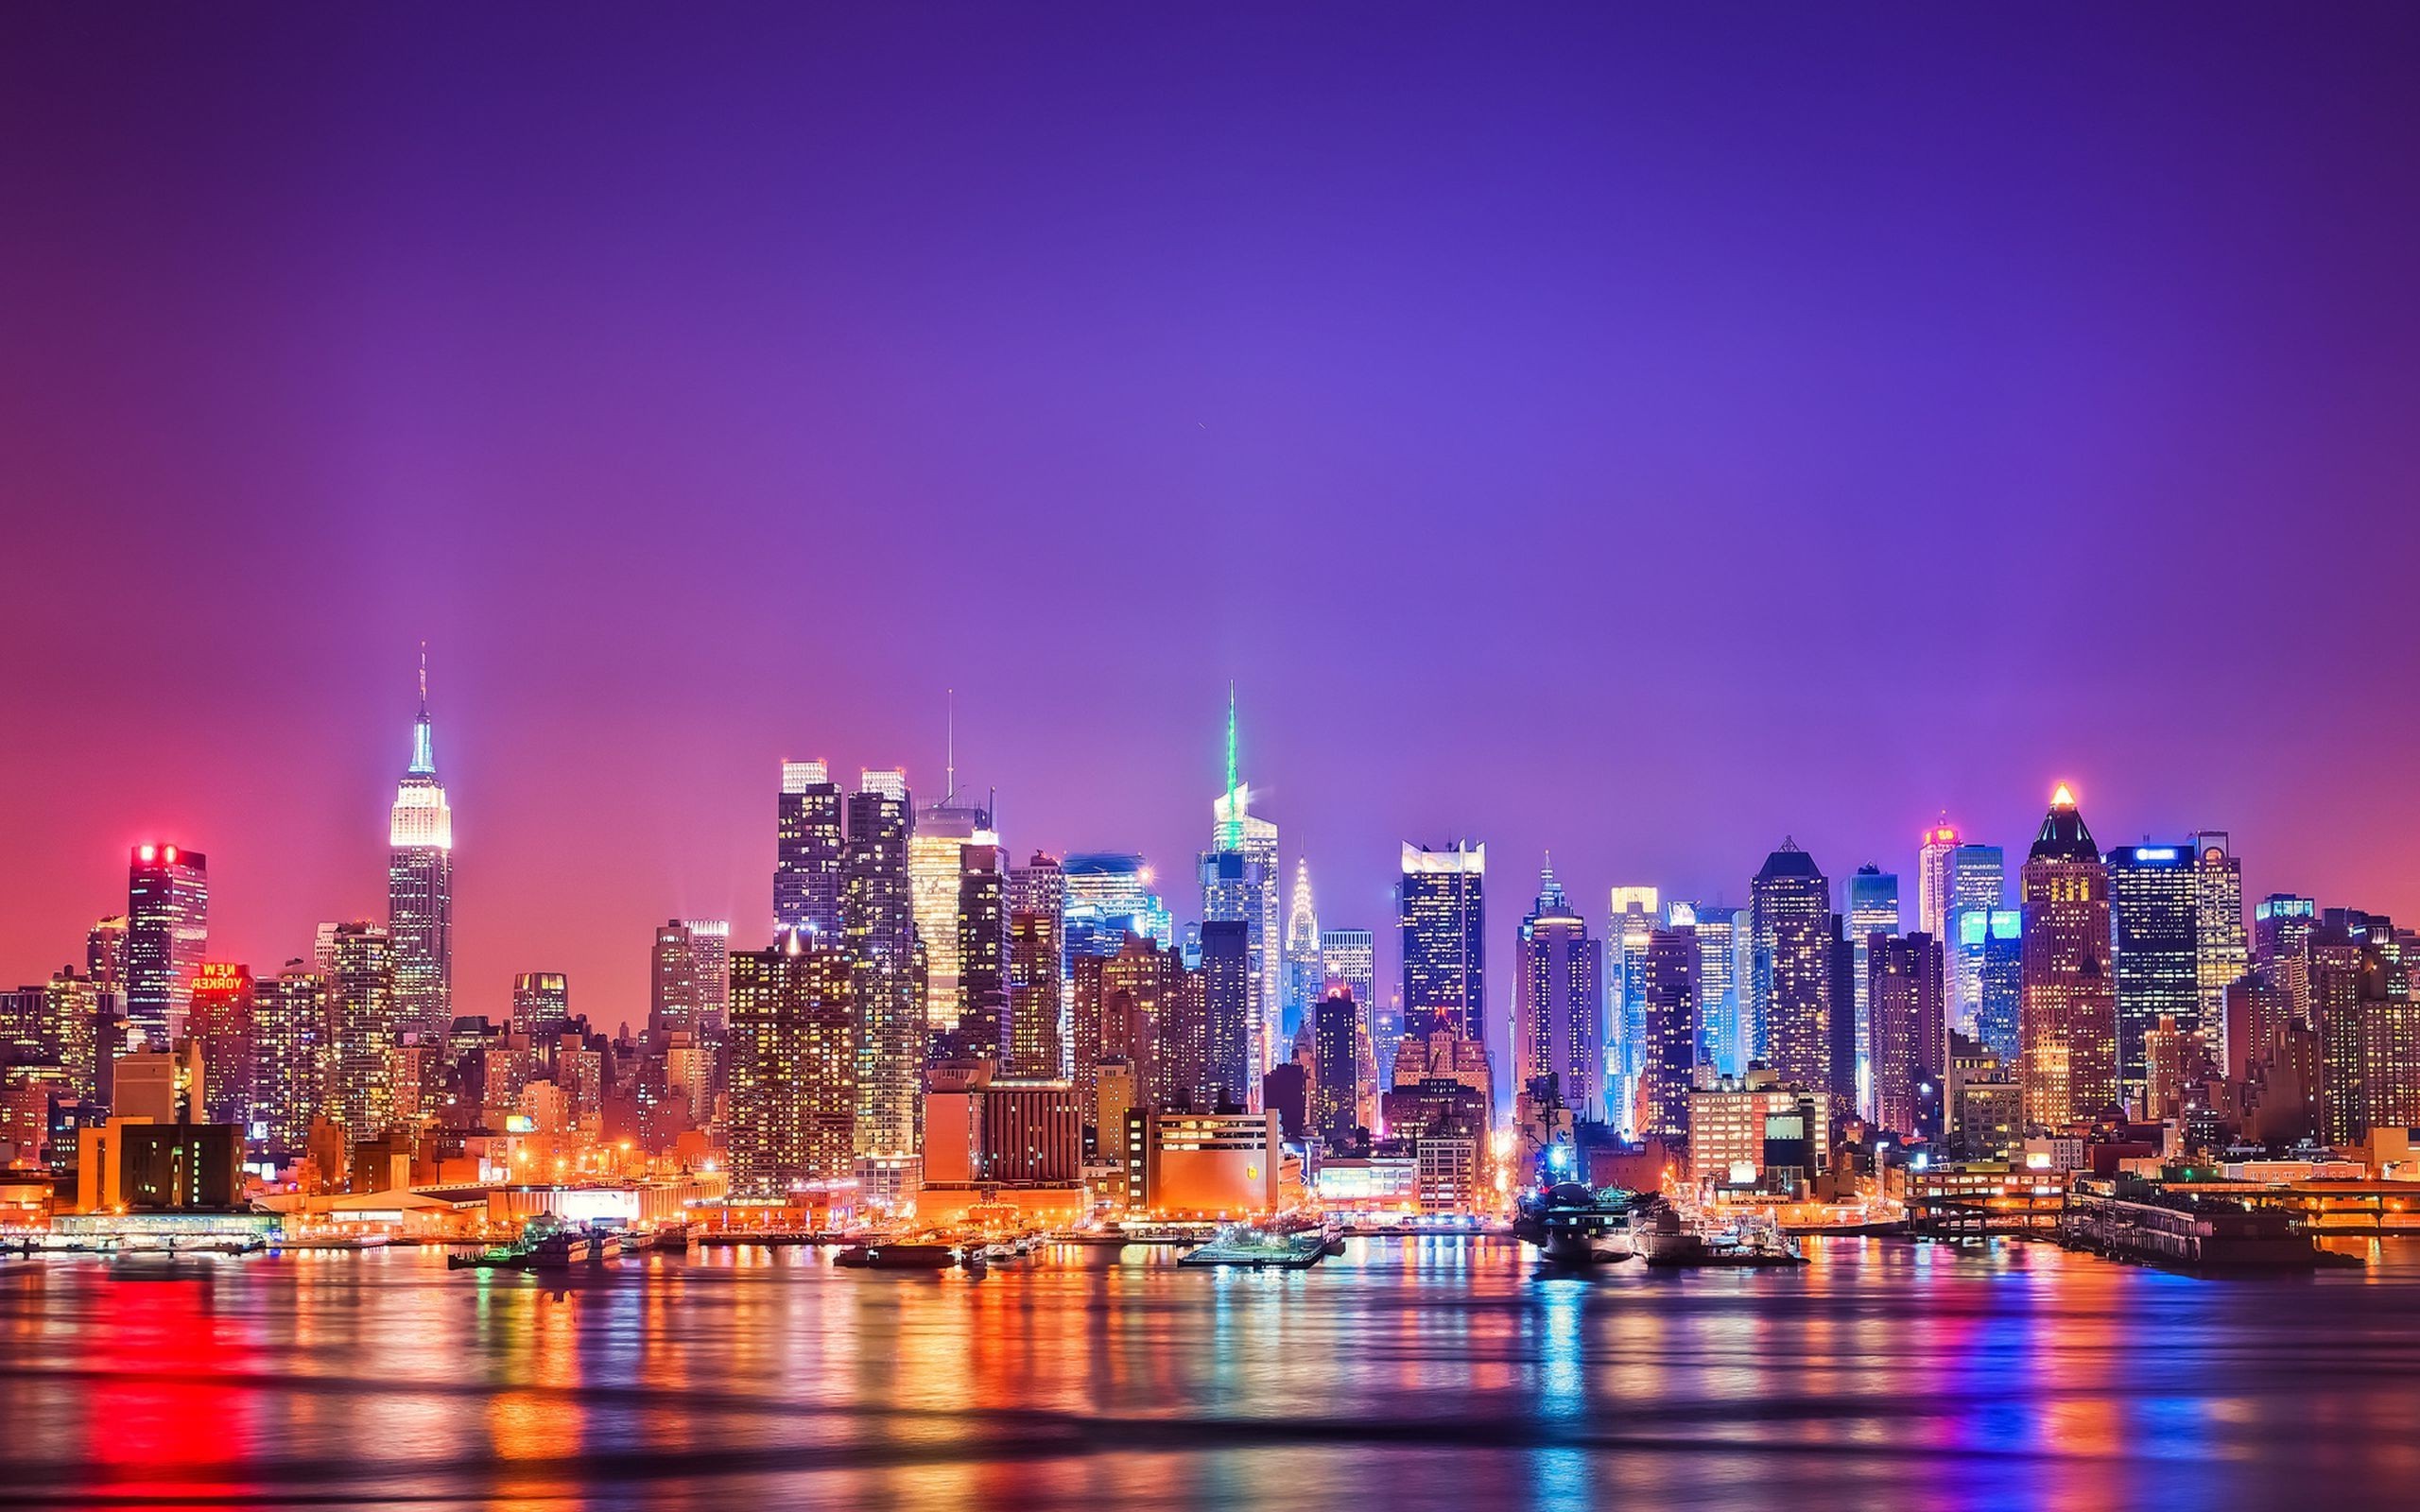 Beautiful New York City Light at Night Wallpaper in High Resolution at